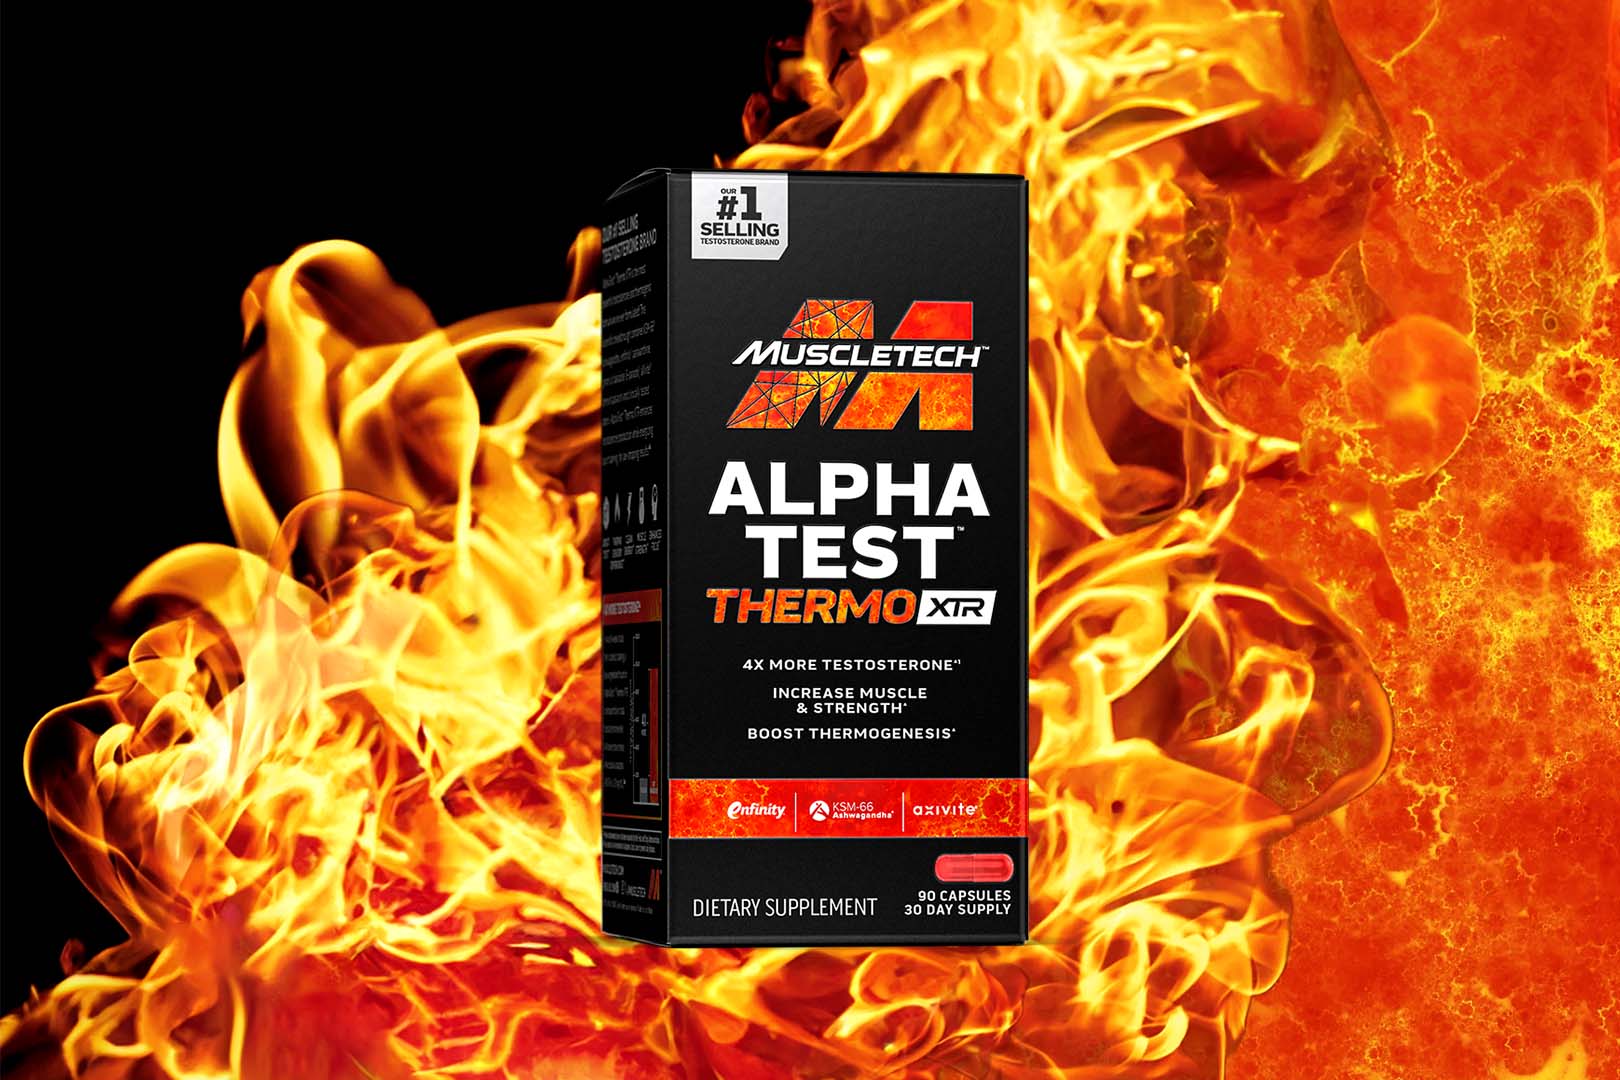 Muscletech Alphatest Thermo Xtr